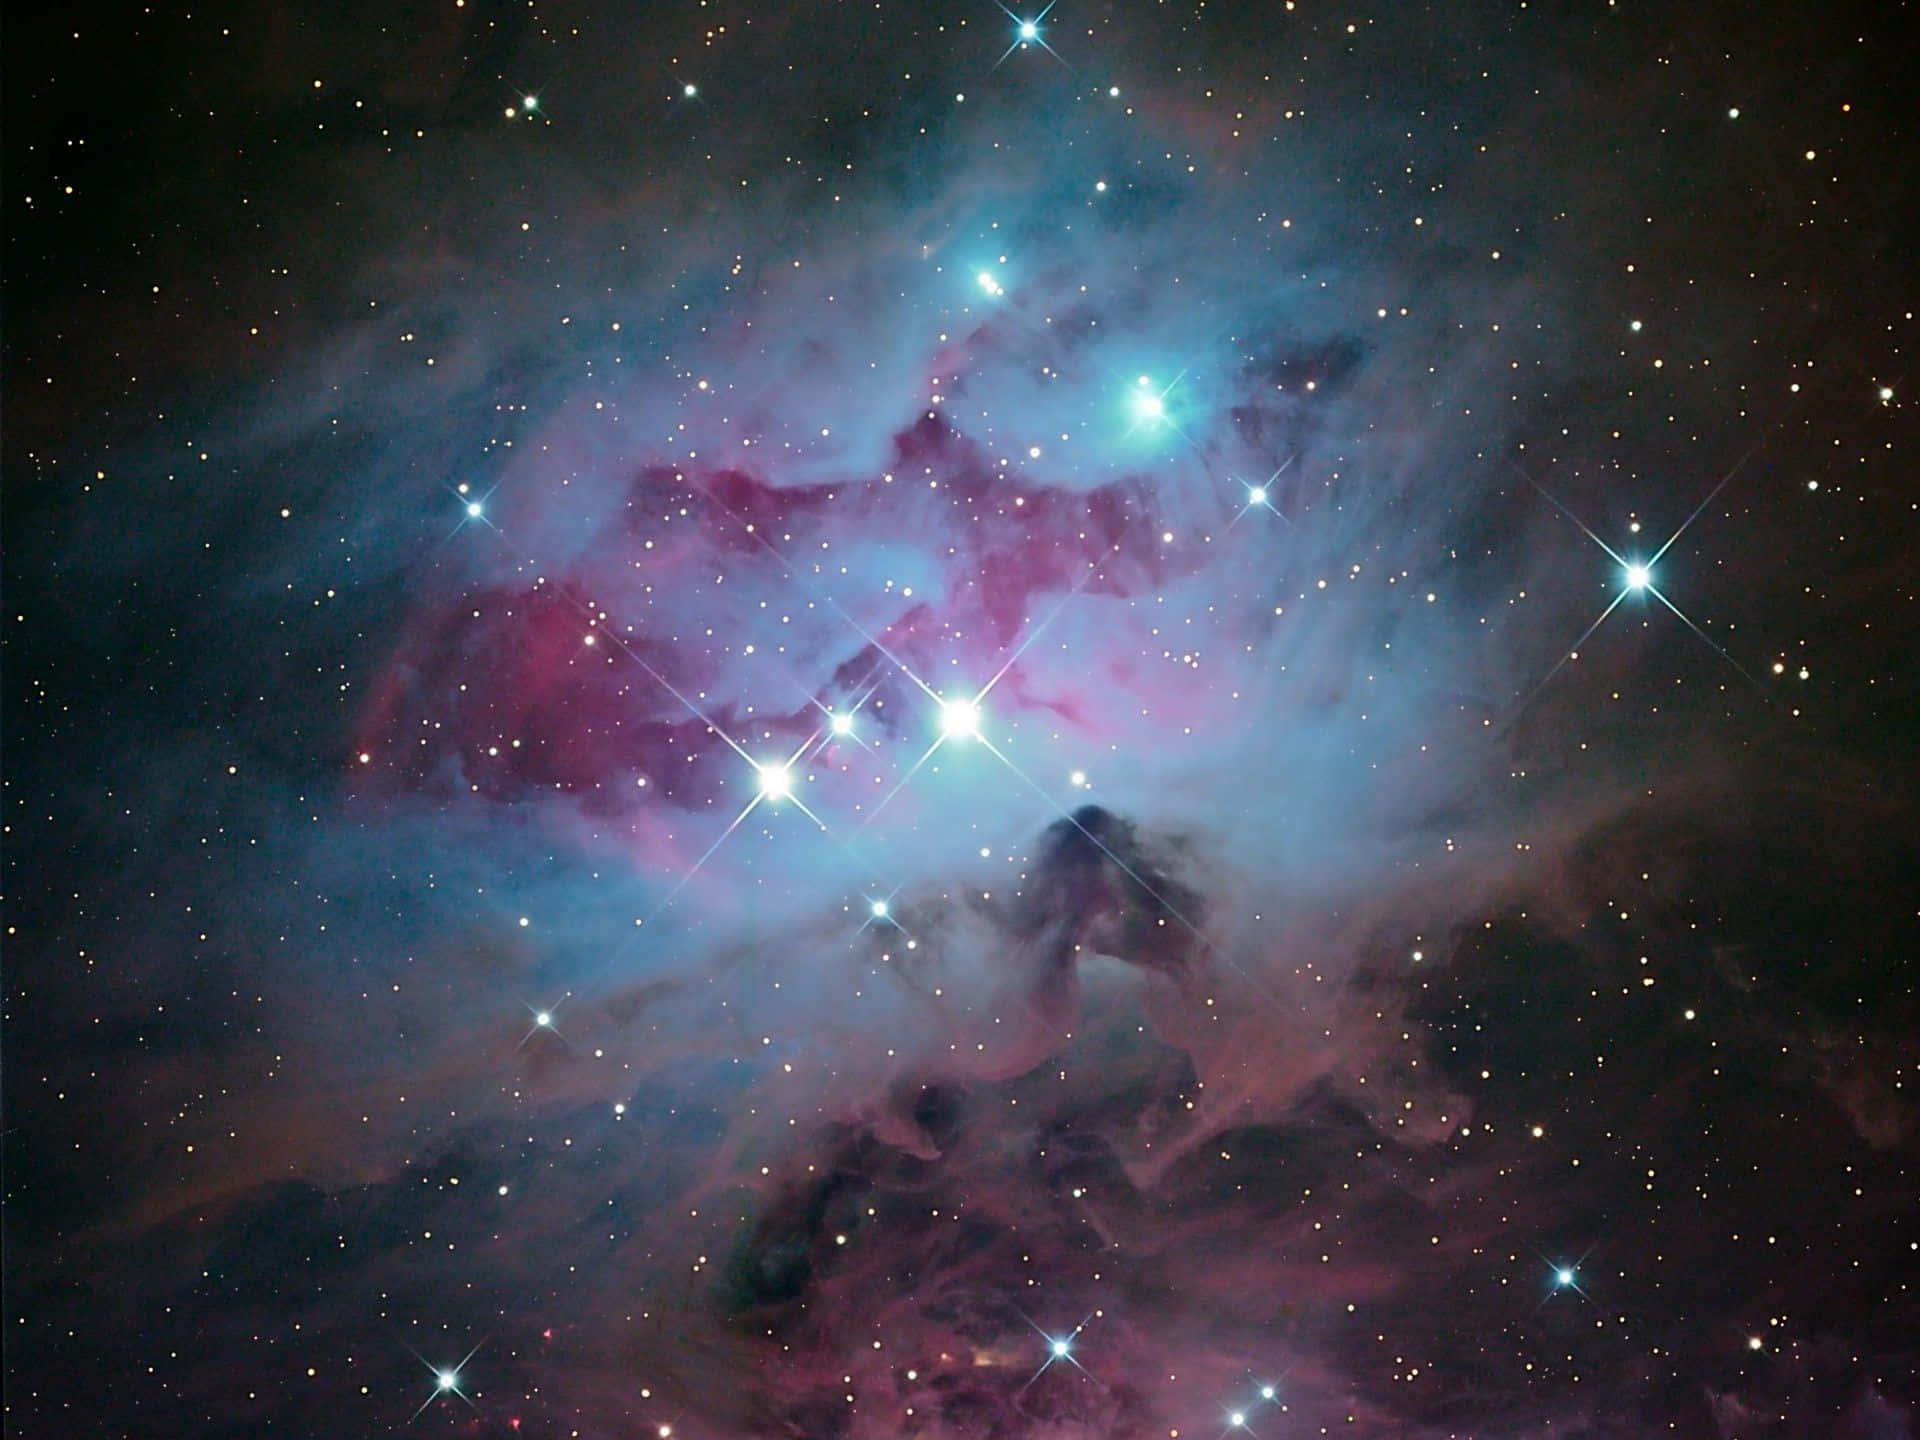 Stargazing in the Orion Constellation